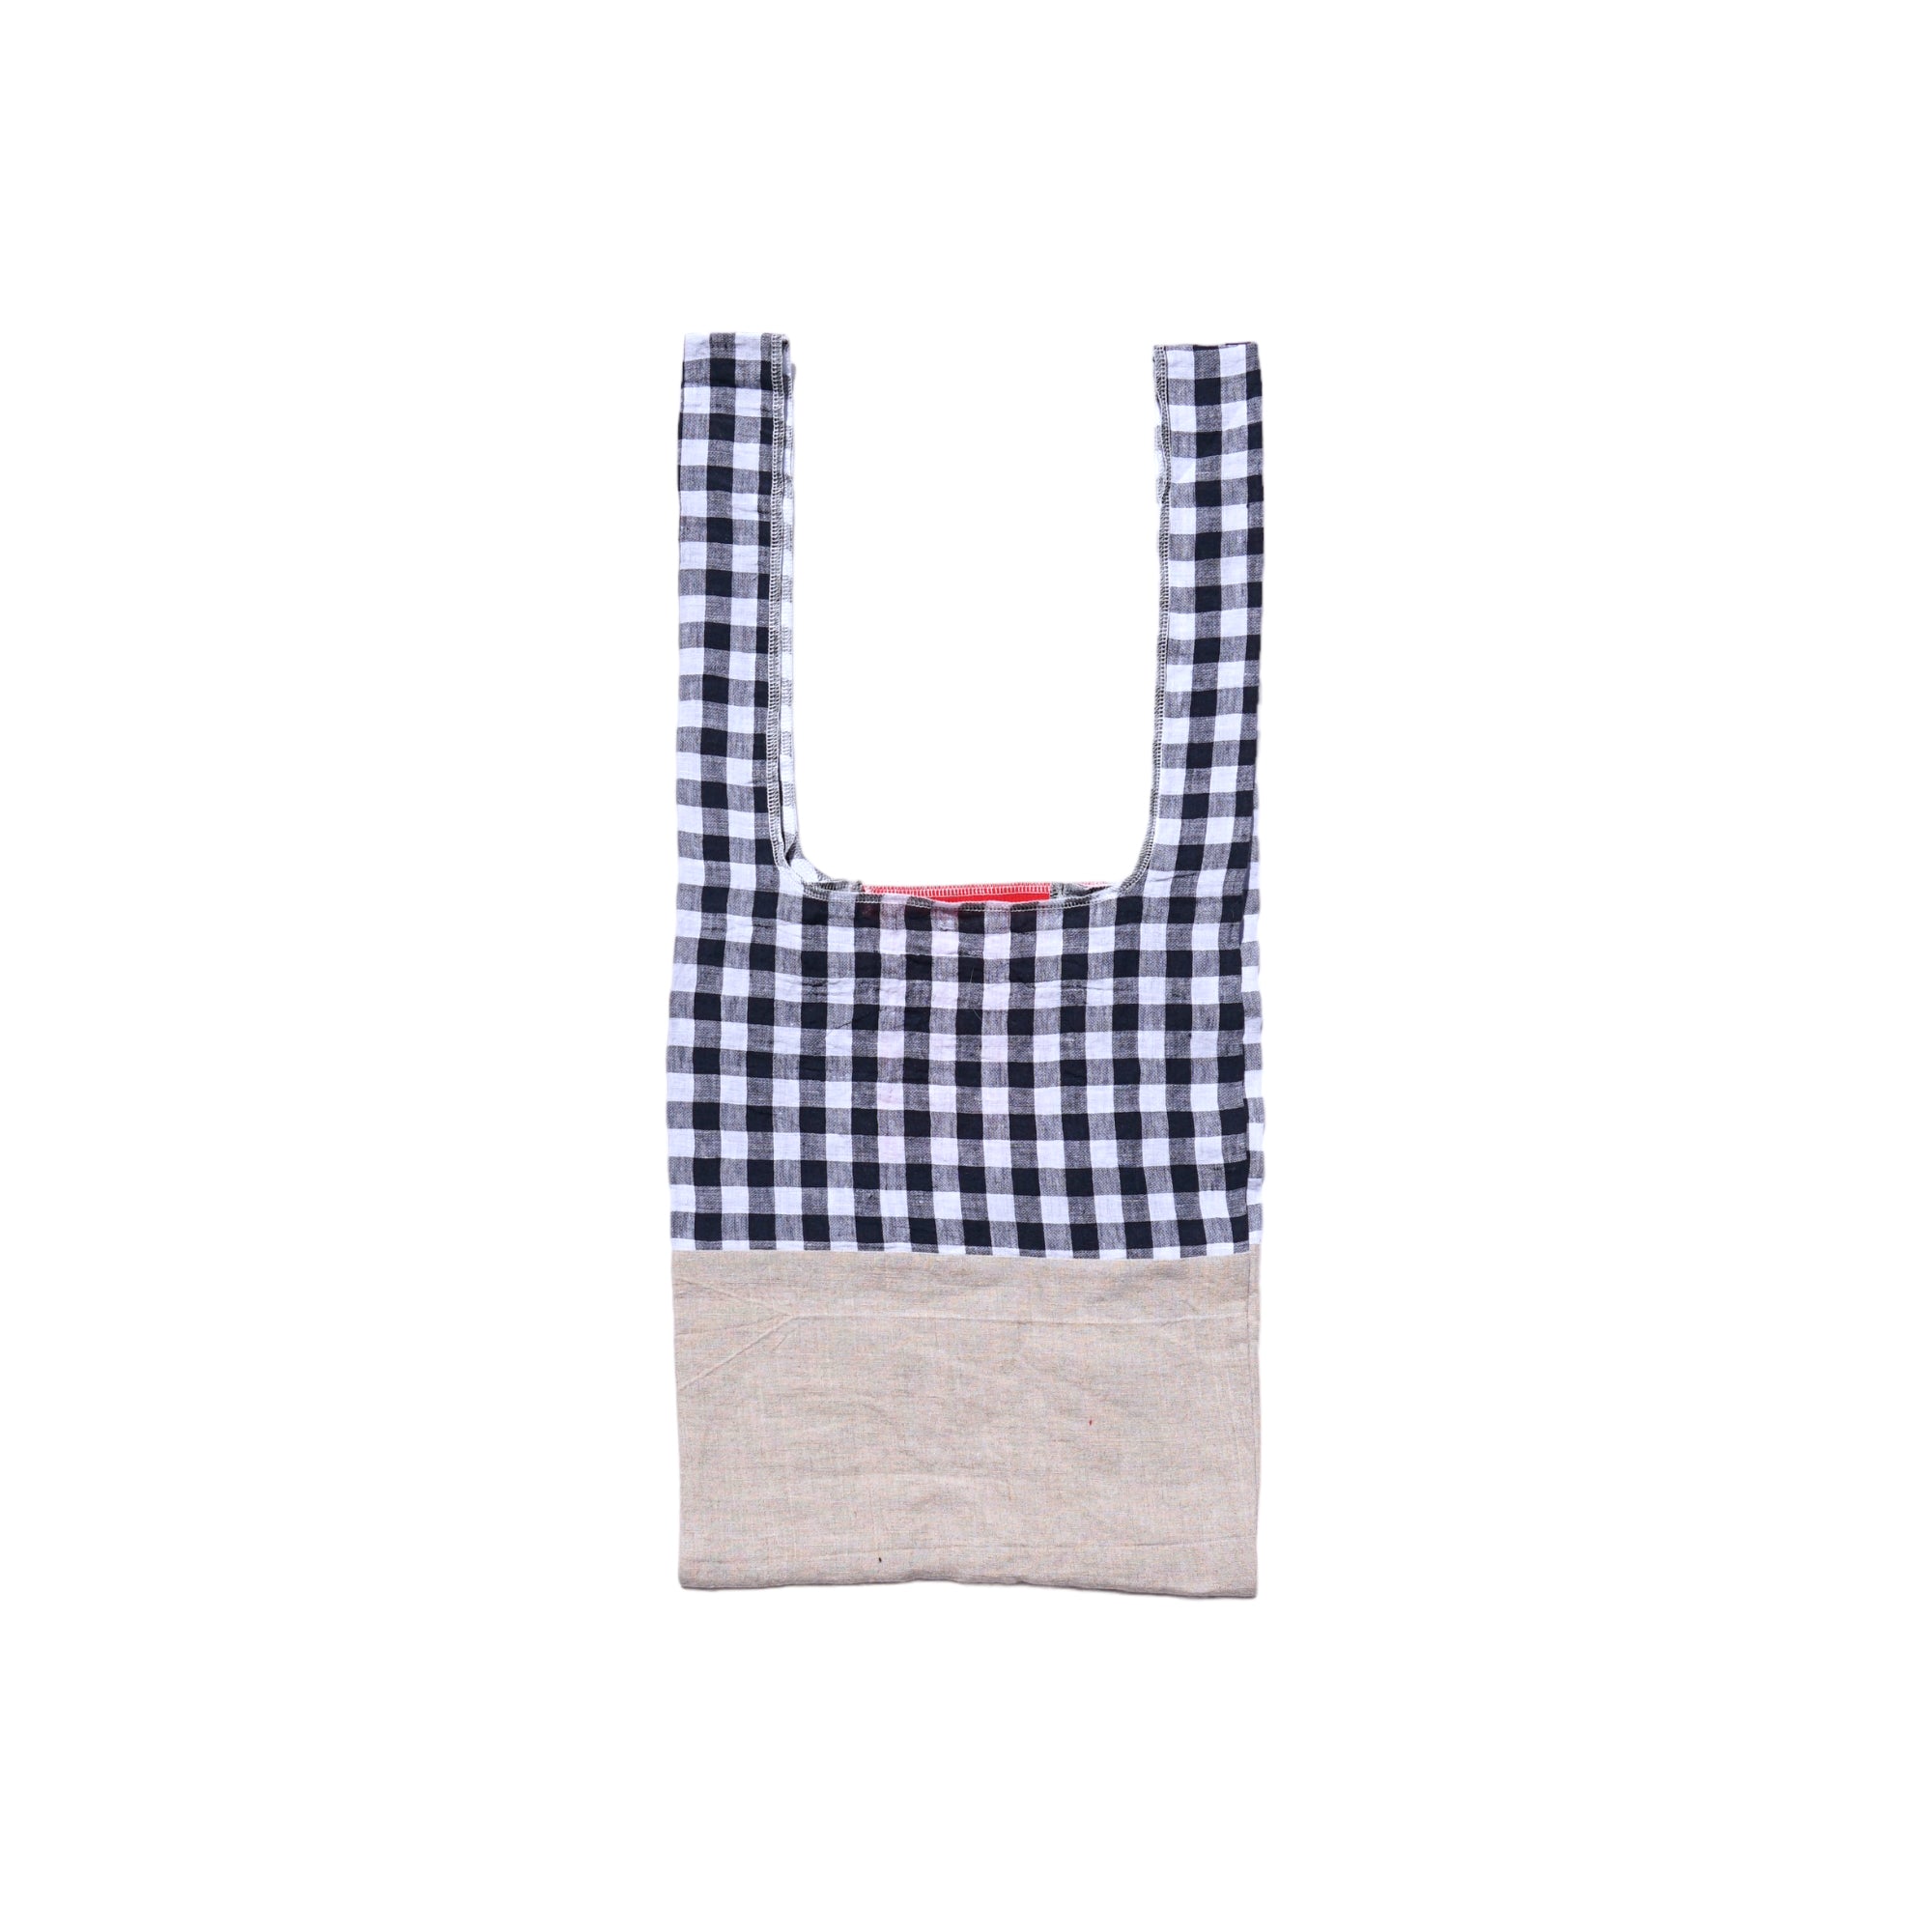 Cozy linen gingham×Washed linen / 202303ECO05